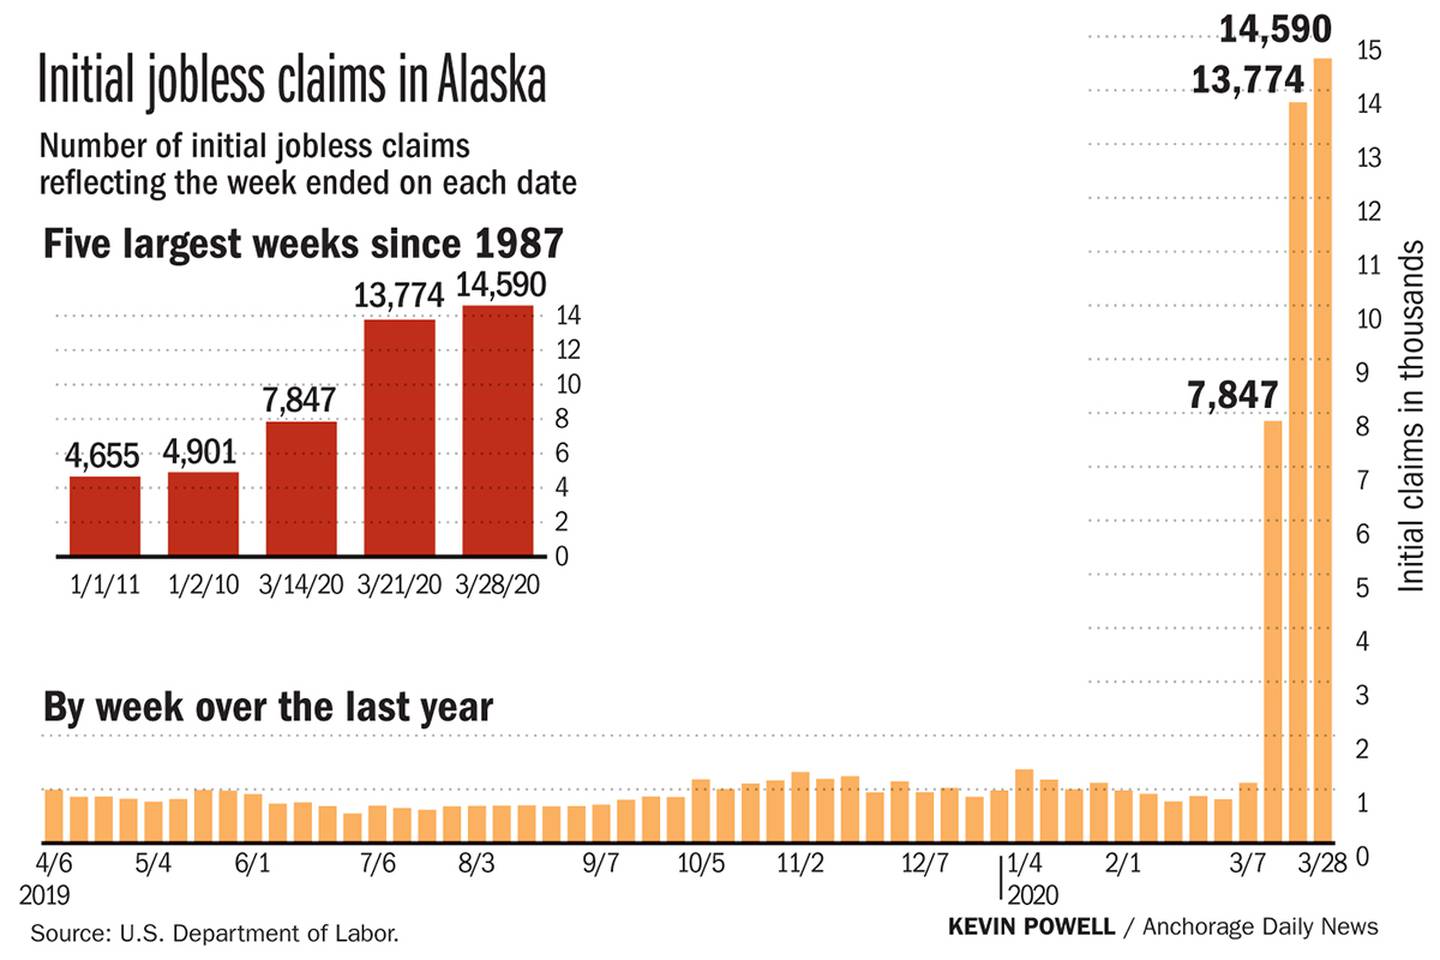 Initial jobless claims in Alaska